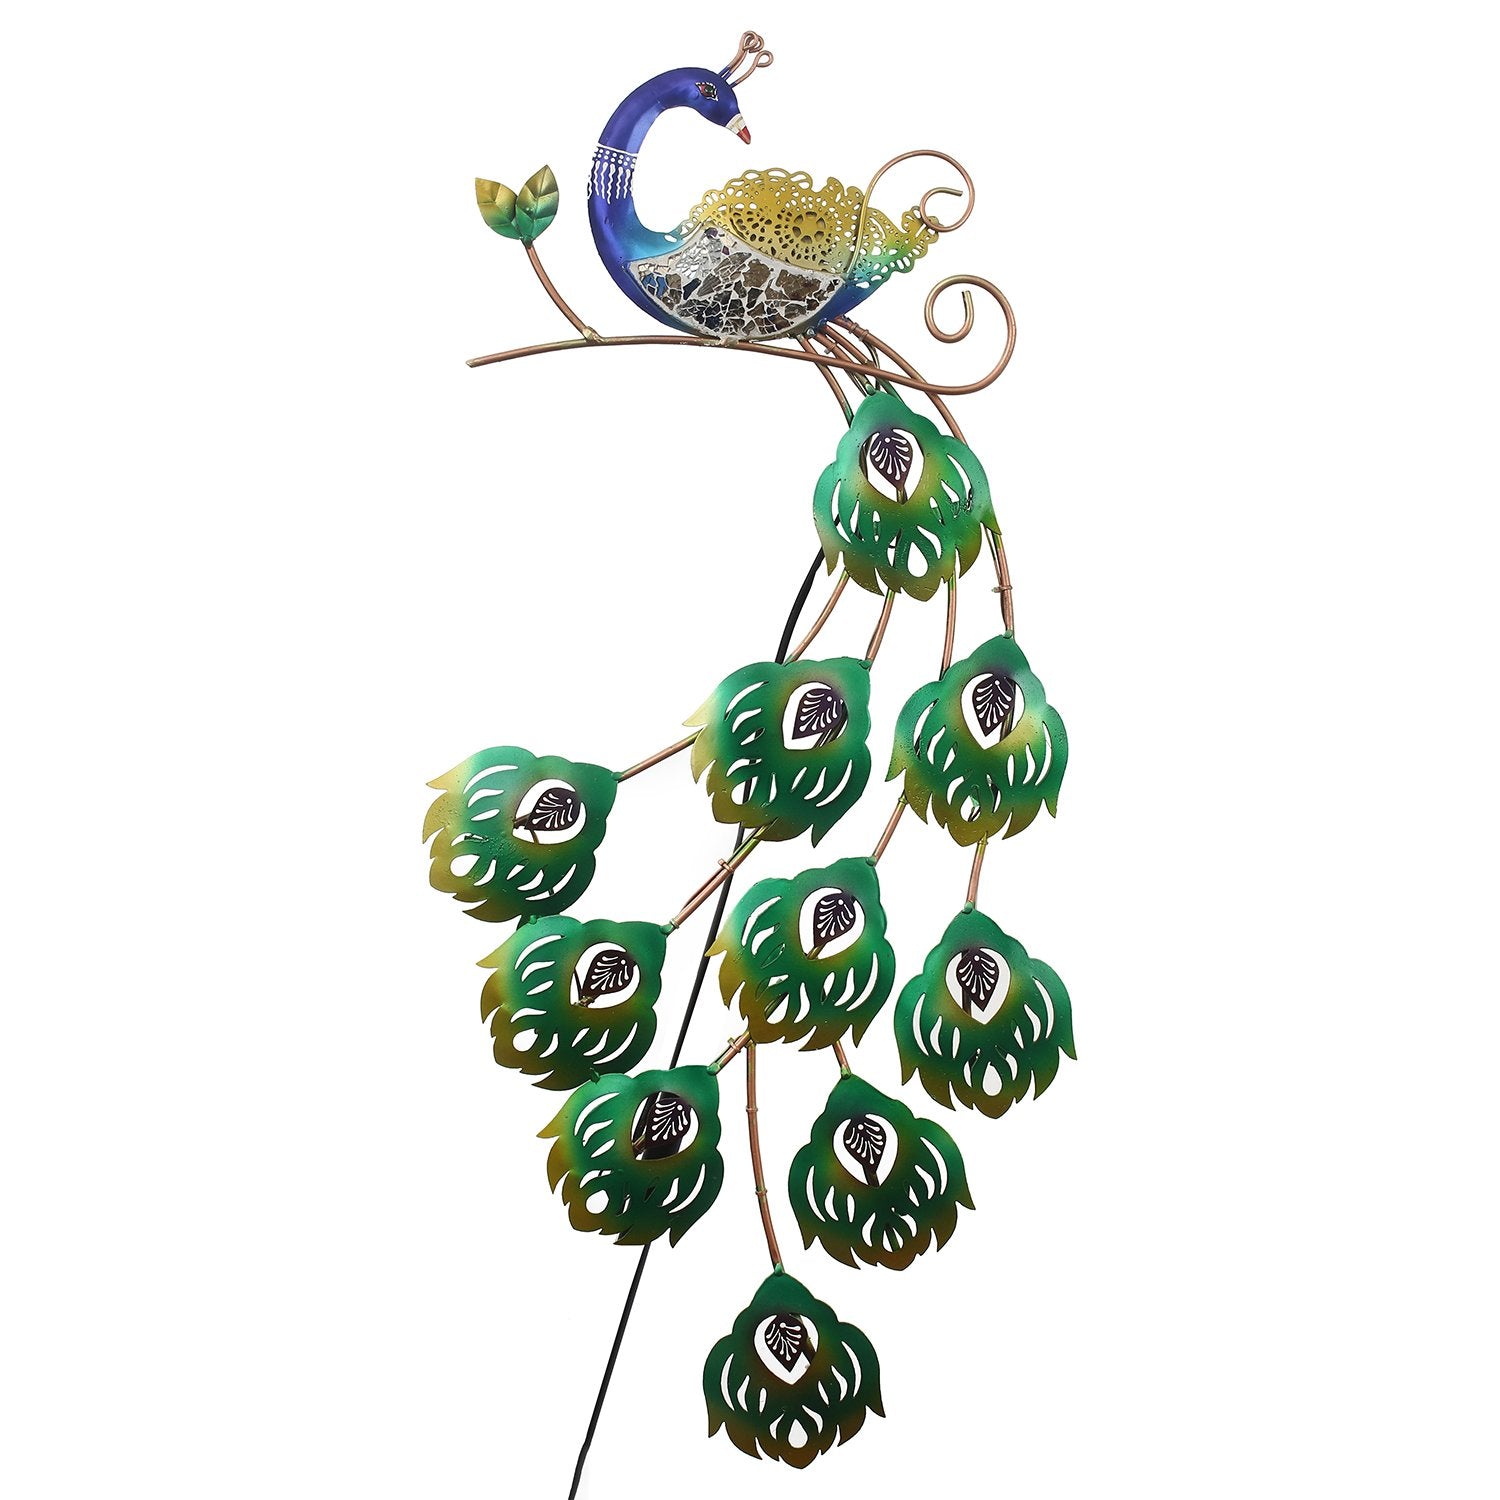 Colorful Dancing Peacock Handcrafted Iron Wall Hanging with background LED's (Blue, Green and Golden) 2